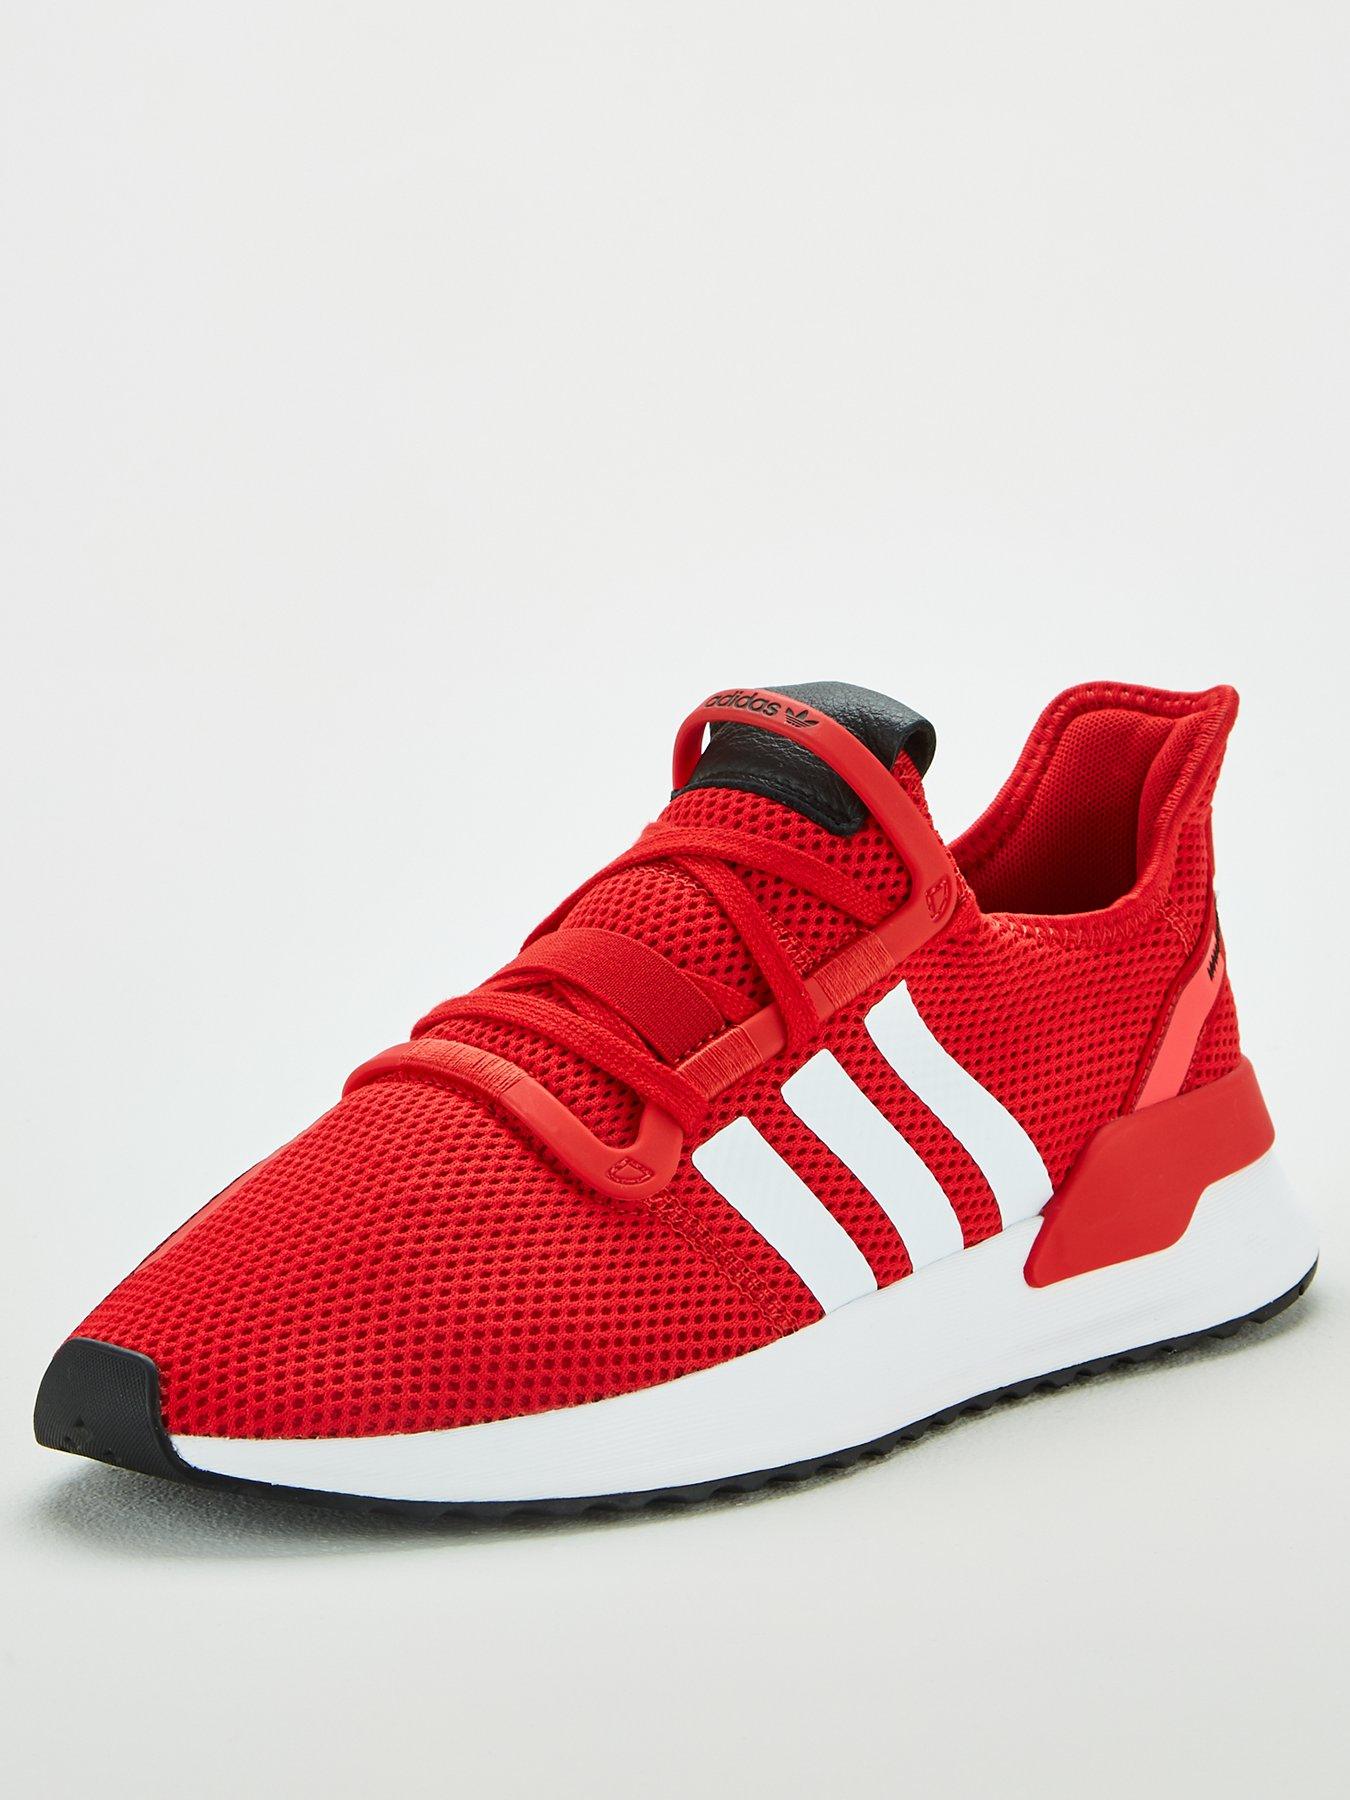 all red adidas trainers